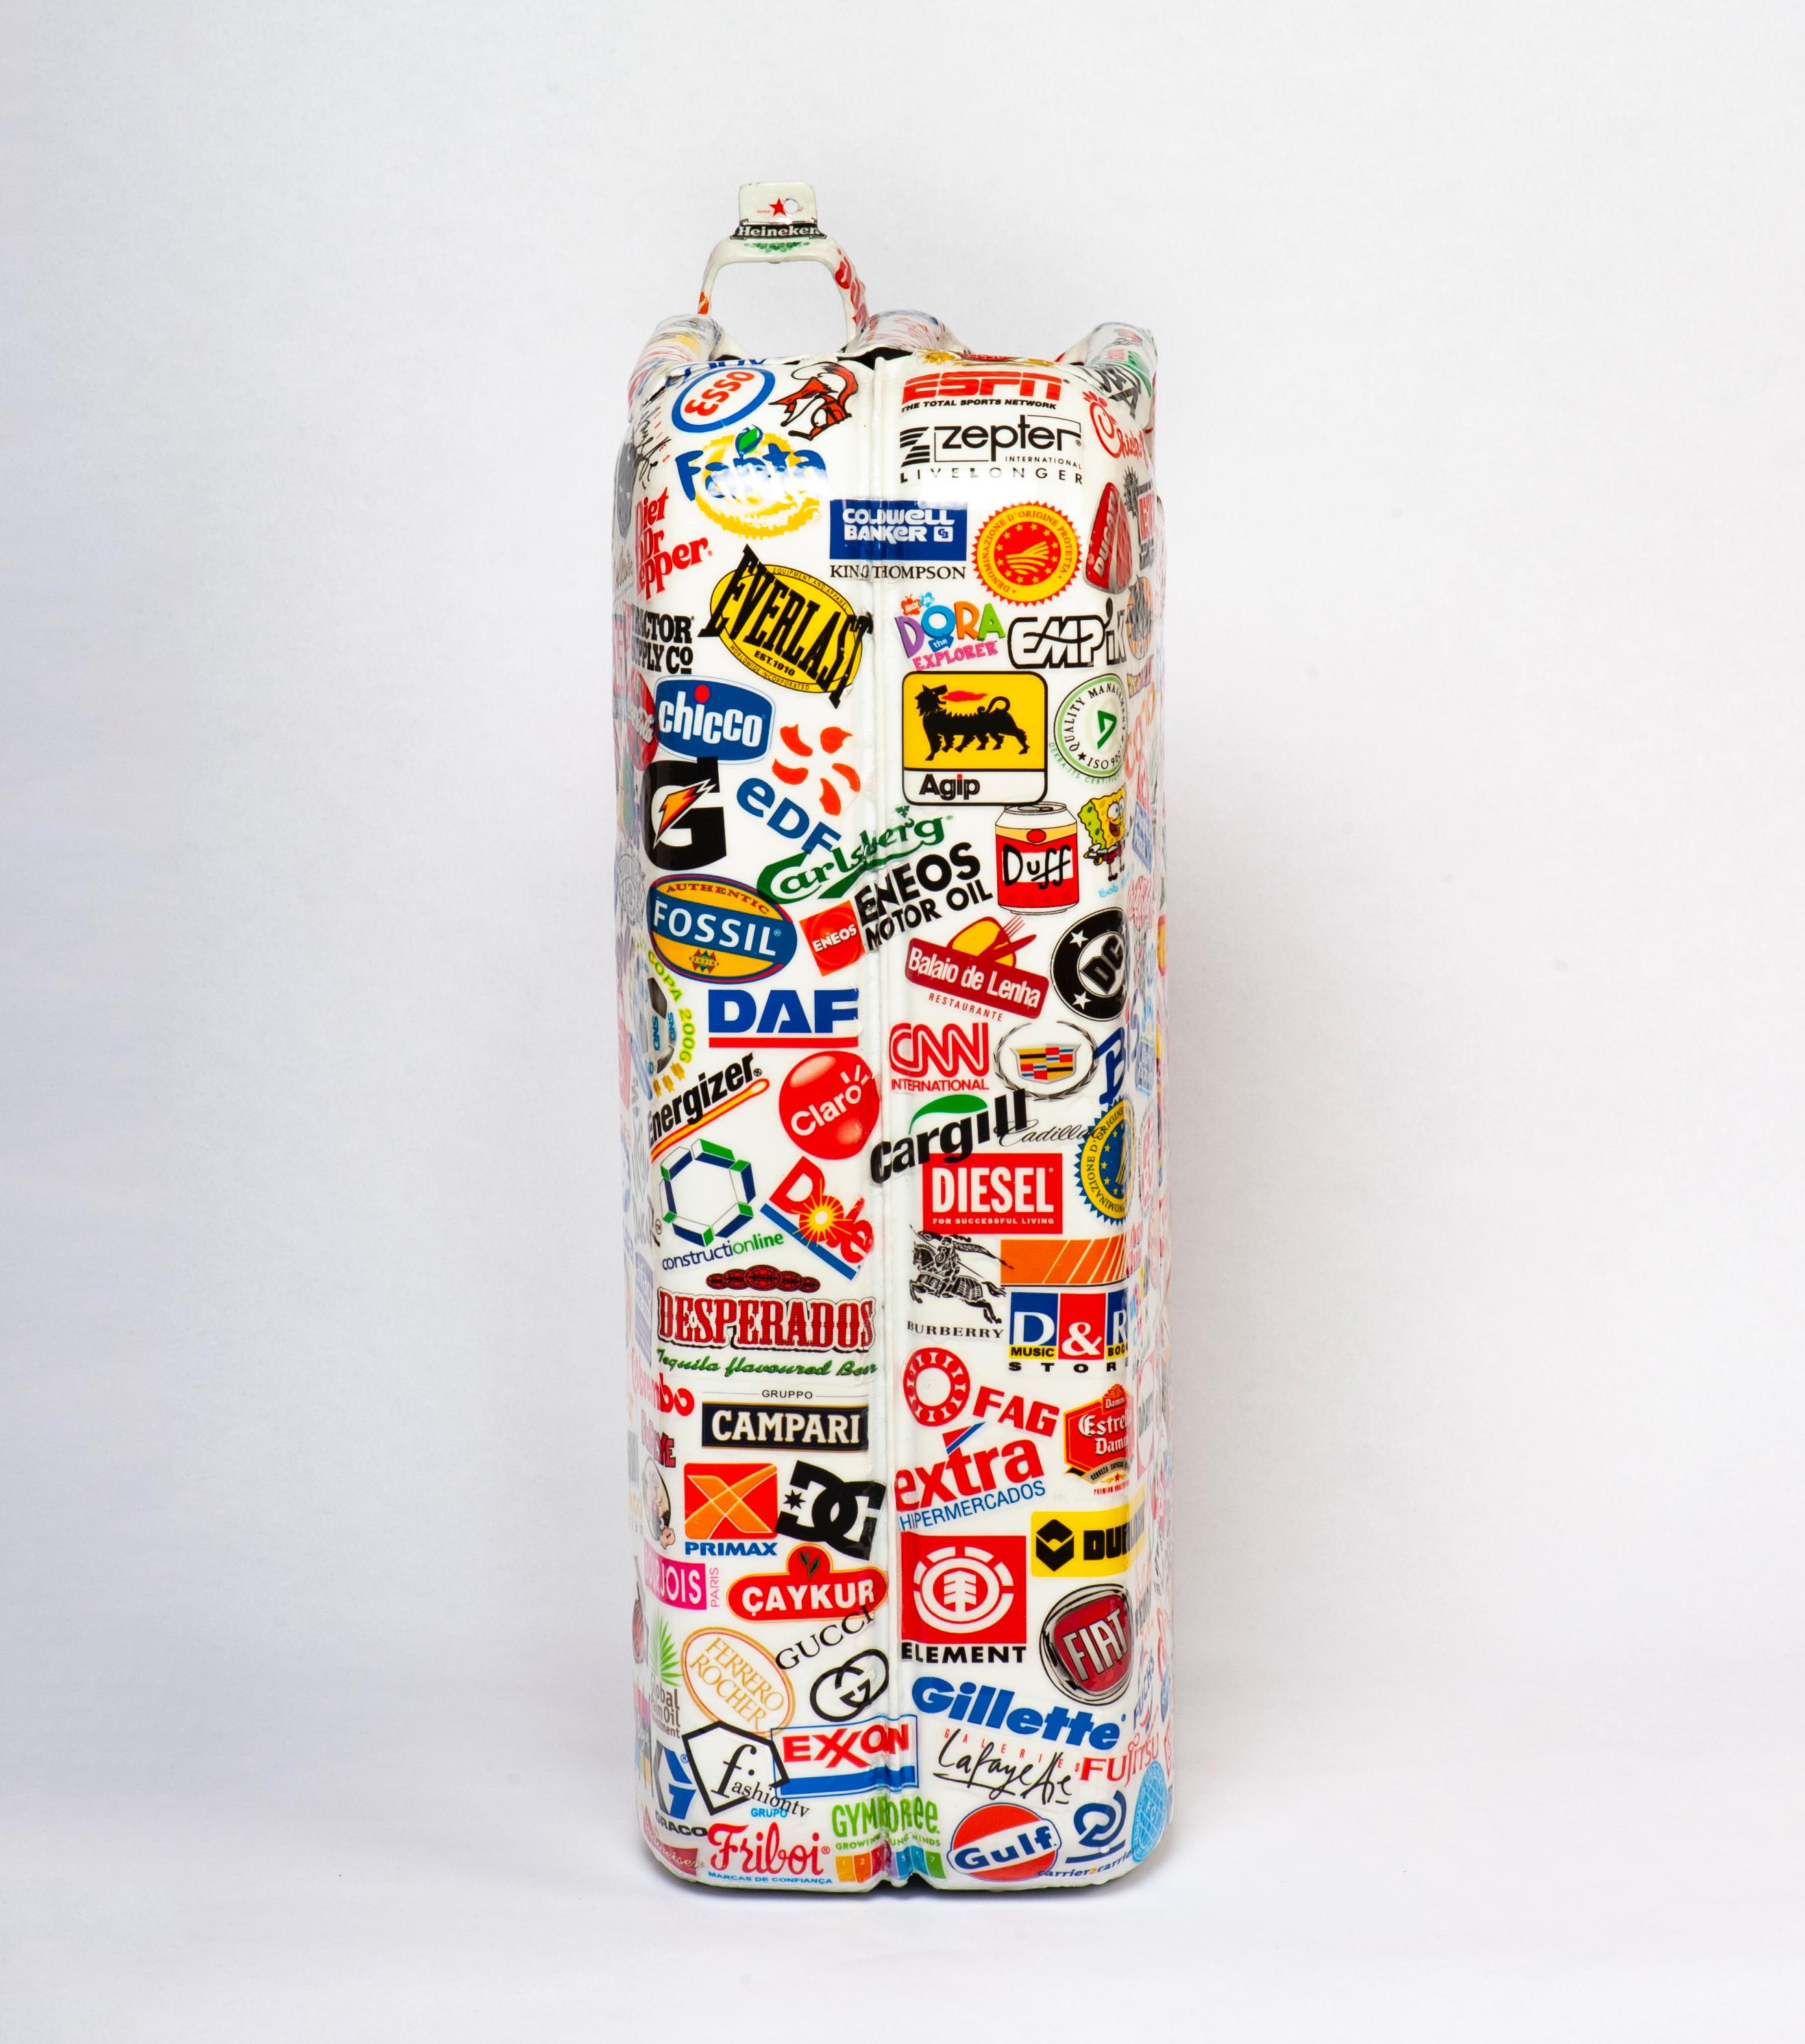 Metal Jerrycan Sculpture with Sticker Ornaments - Contemporary Mixed Media Art by Alain Brioudes